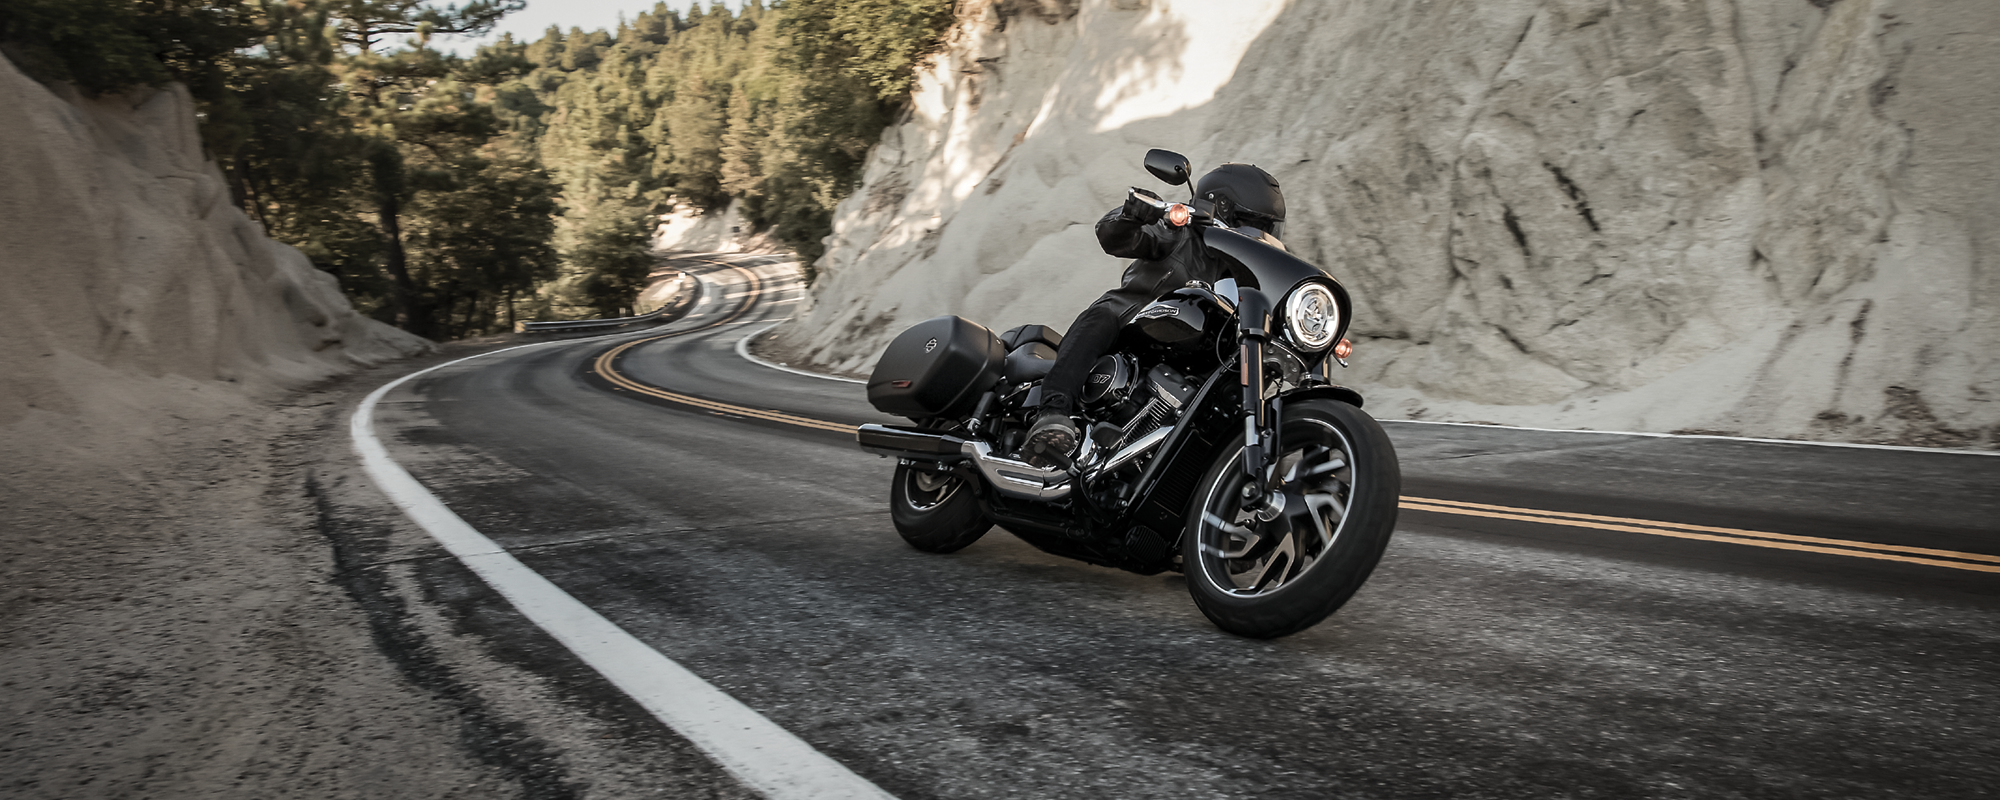 Find Your Dream Ride at Harley-Davidson of Asheville